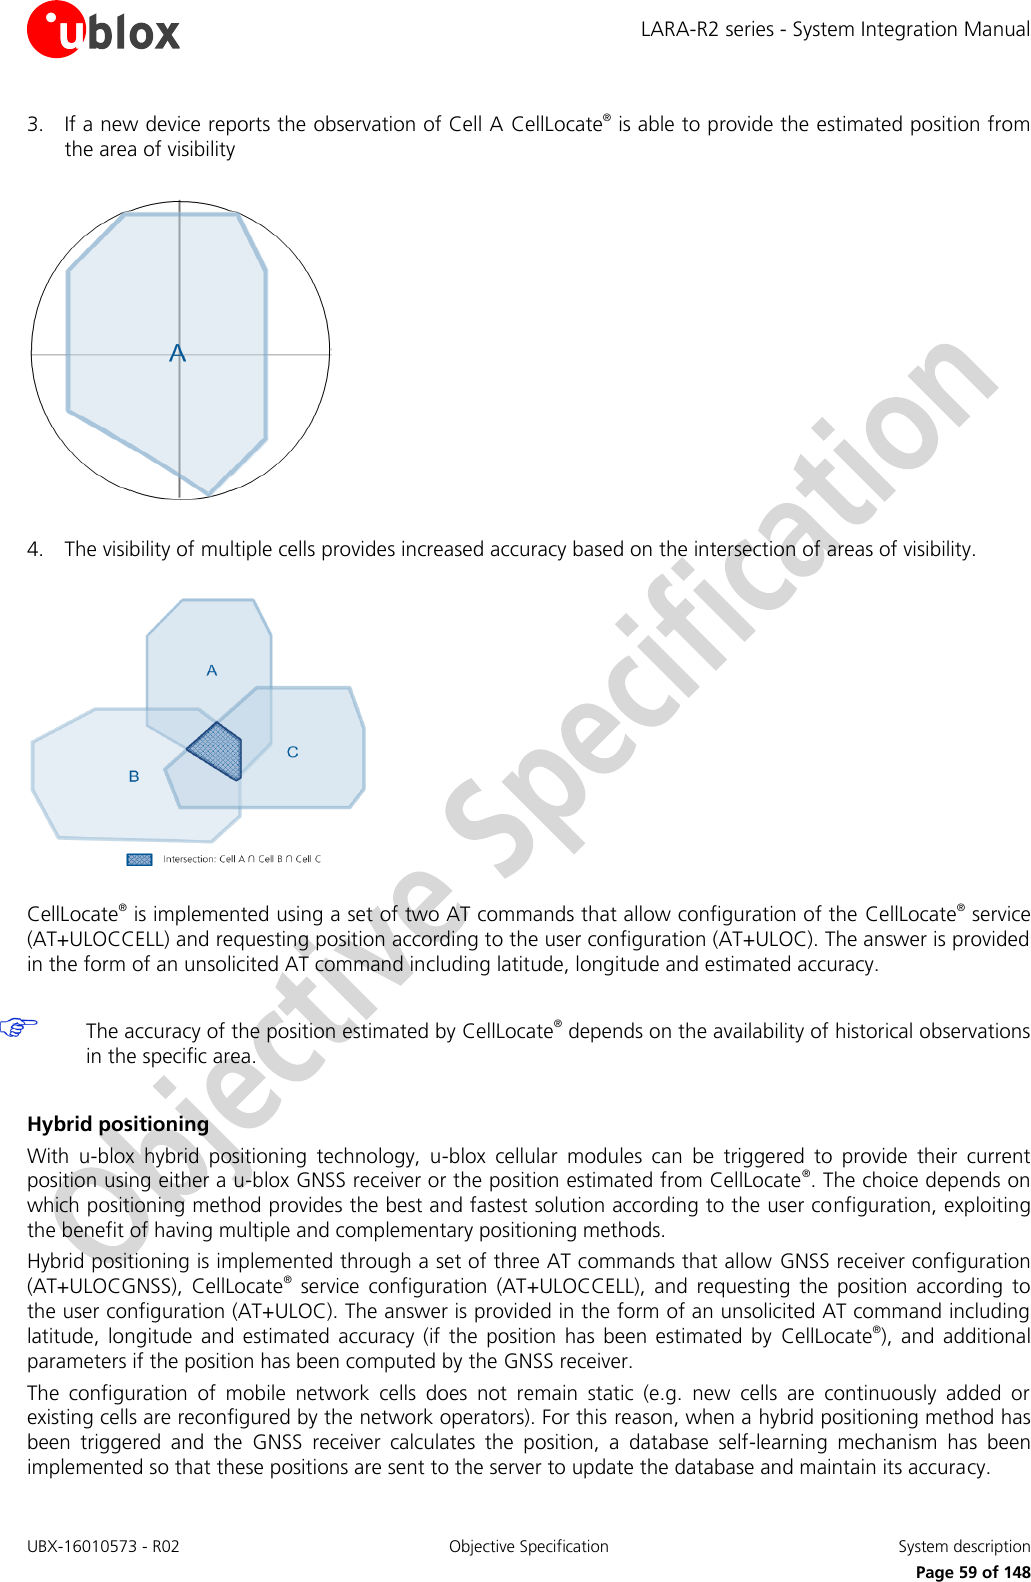 LARA-R2 series - System Integration Manual UBX-16010573 - R02  Objective Specification  System description     Page 59 of 148 3. If a new device reports the observation of Cell A CellLocate® is able to provide the estimated position from the area of visibility    4. The visibility of multiple cells provides increased accuracy based on the intersection of areas of visibility.    CellLocate® is implemented using a set of two AT commands that allow configuration of the CellLocate® service (AT+ULOCCELL) and requesting position according to the user configuration (AT+ULOC). The answer is provided in the form of an unsolicited AT command including latitude, longitude and estimated accuracy.   The accuracy of the position estimated by CellLocate® depends on the availability of historical observations in the specific area.  Hybrid positioning With  u-blox  hybrid  positioning  technology,  u-blox  cellular  modules  can  be  triggered  to  provide  their  current position using either a u-blox GNSS receiver or the position estimated from CellLocate®. The choice depends on which positioning method provides the best and fastest solution according to the user configuration, exploiting the benefit of having multiple and complementary positioning methods. Hybrid positioning is implemented through a set of three AT commands that allow GNSS receiver configuration (AT+ULOCGNSS),  CellLocate®  service  configuration  (AT+ULOCCELL),  and  requesting  the  position  according  to the user configuration (AT+ULOC). The answer is provided in the form of an unsolicited AT command including latitude,  longitude  and  estimated  accuracy  (if  the  position has  been  estimated  by  CellLocate®),  and  additional parameters if the position has been computed by the GNSS receiver. The  configuration  of  mobile  network  cells  does  not  remain  static  (e.g.  new  cells  are  continuously  added  or existing cells are reconfigured by the network operators). For this reason, when a hybrid positioning method has been  triggered  and  the  GNSS  receiver  calculates  the  position,  a  database  self-learning  mechanism  has  been implemented so that these positions are sent to the server to update the database and maintain its accuracy. 